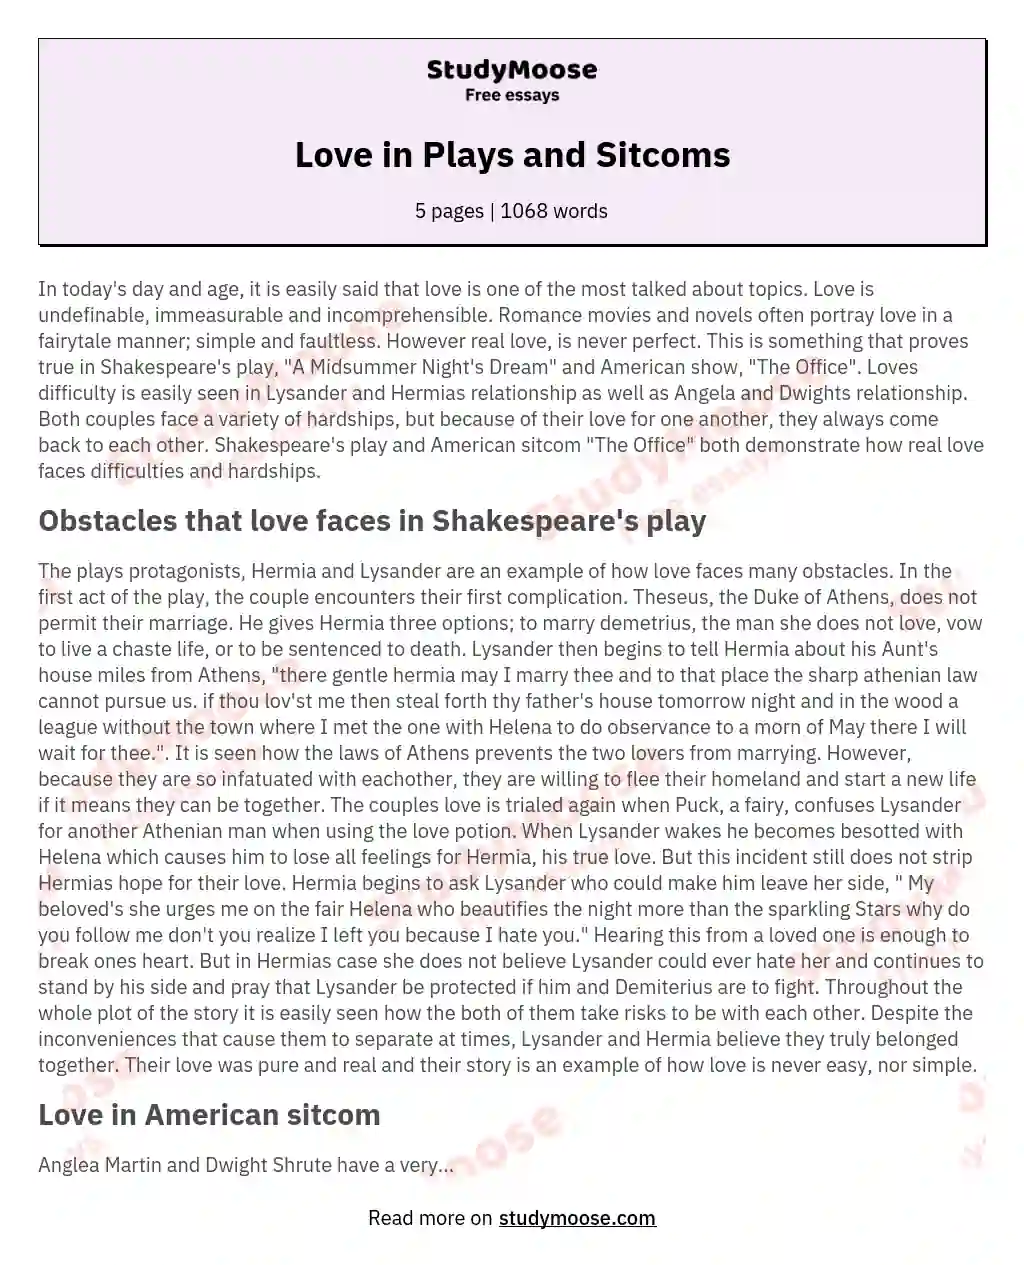 Love in Plays and Sitcoms essay